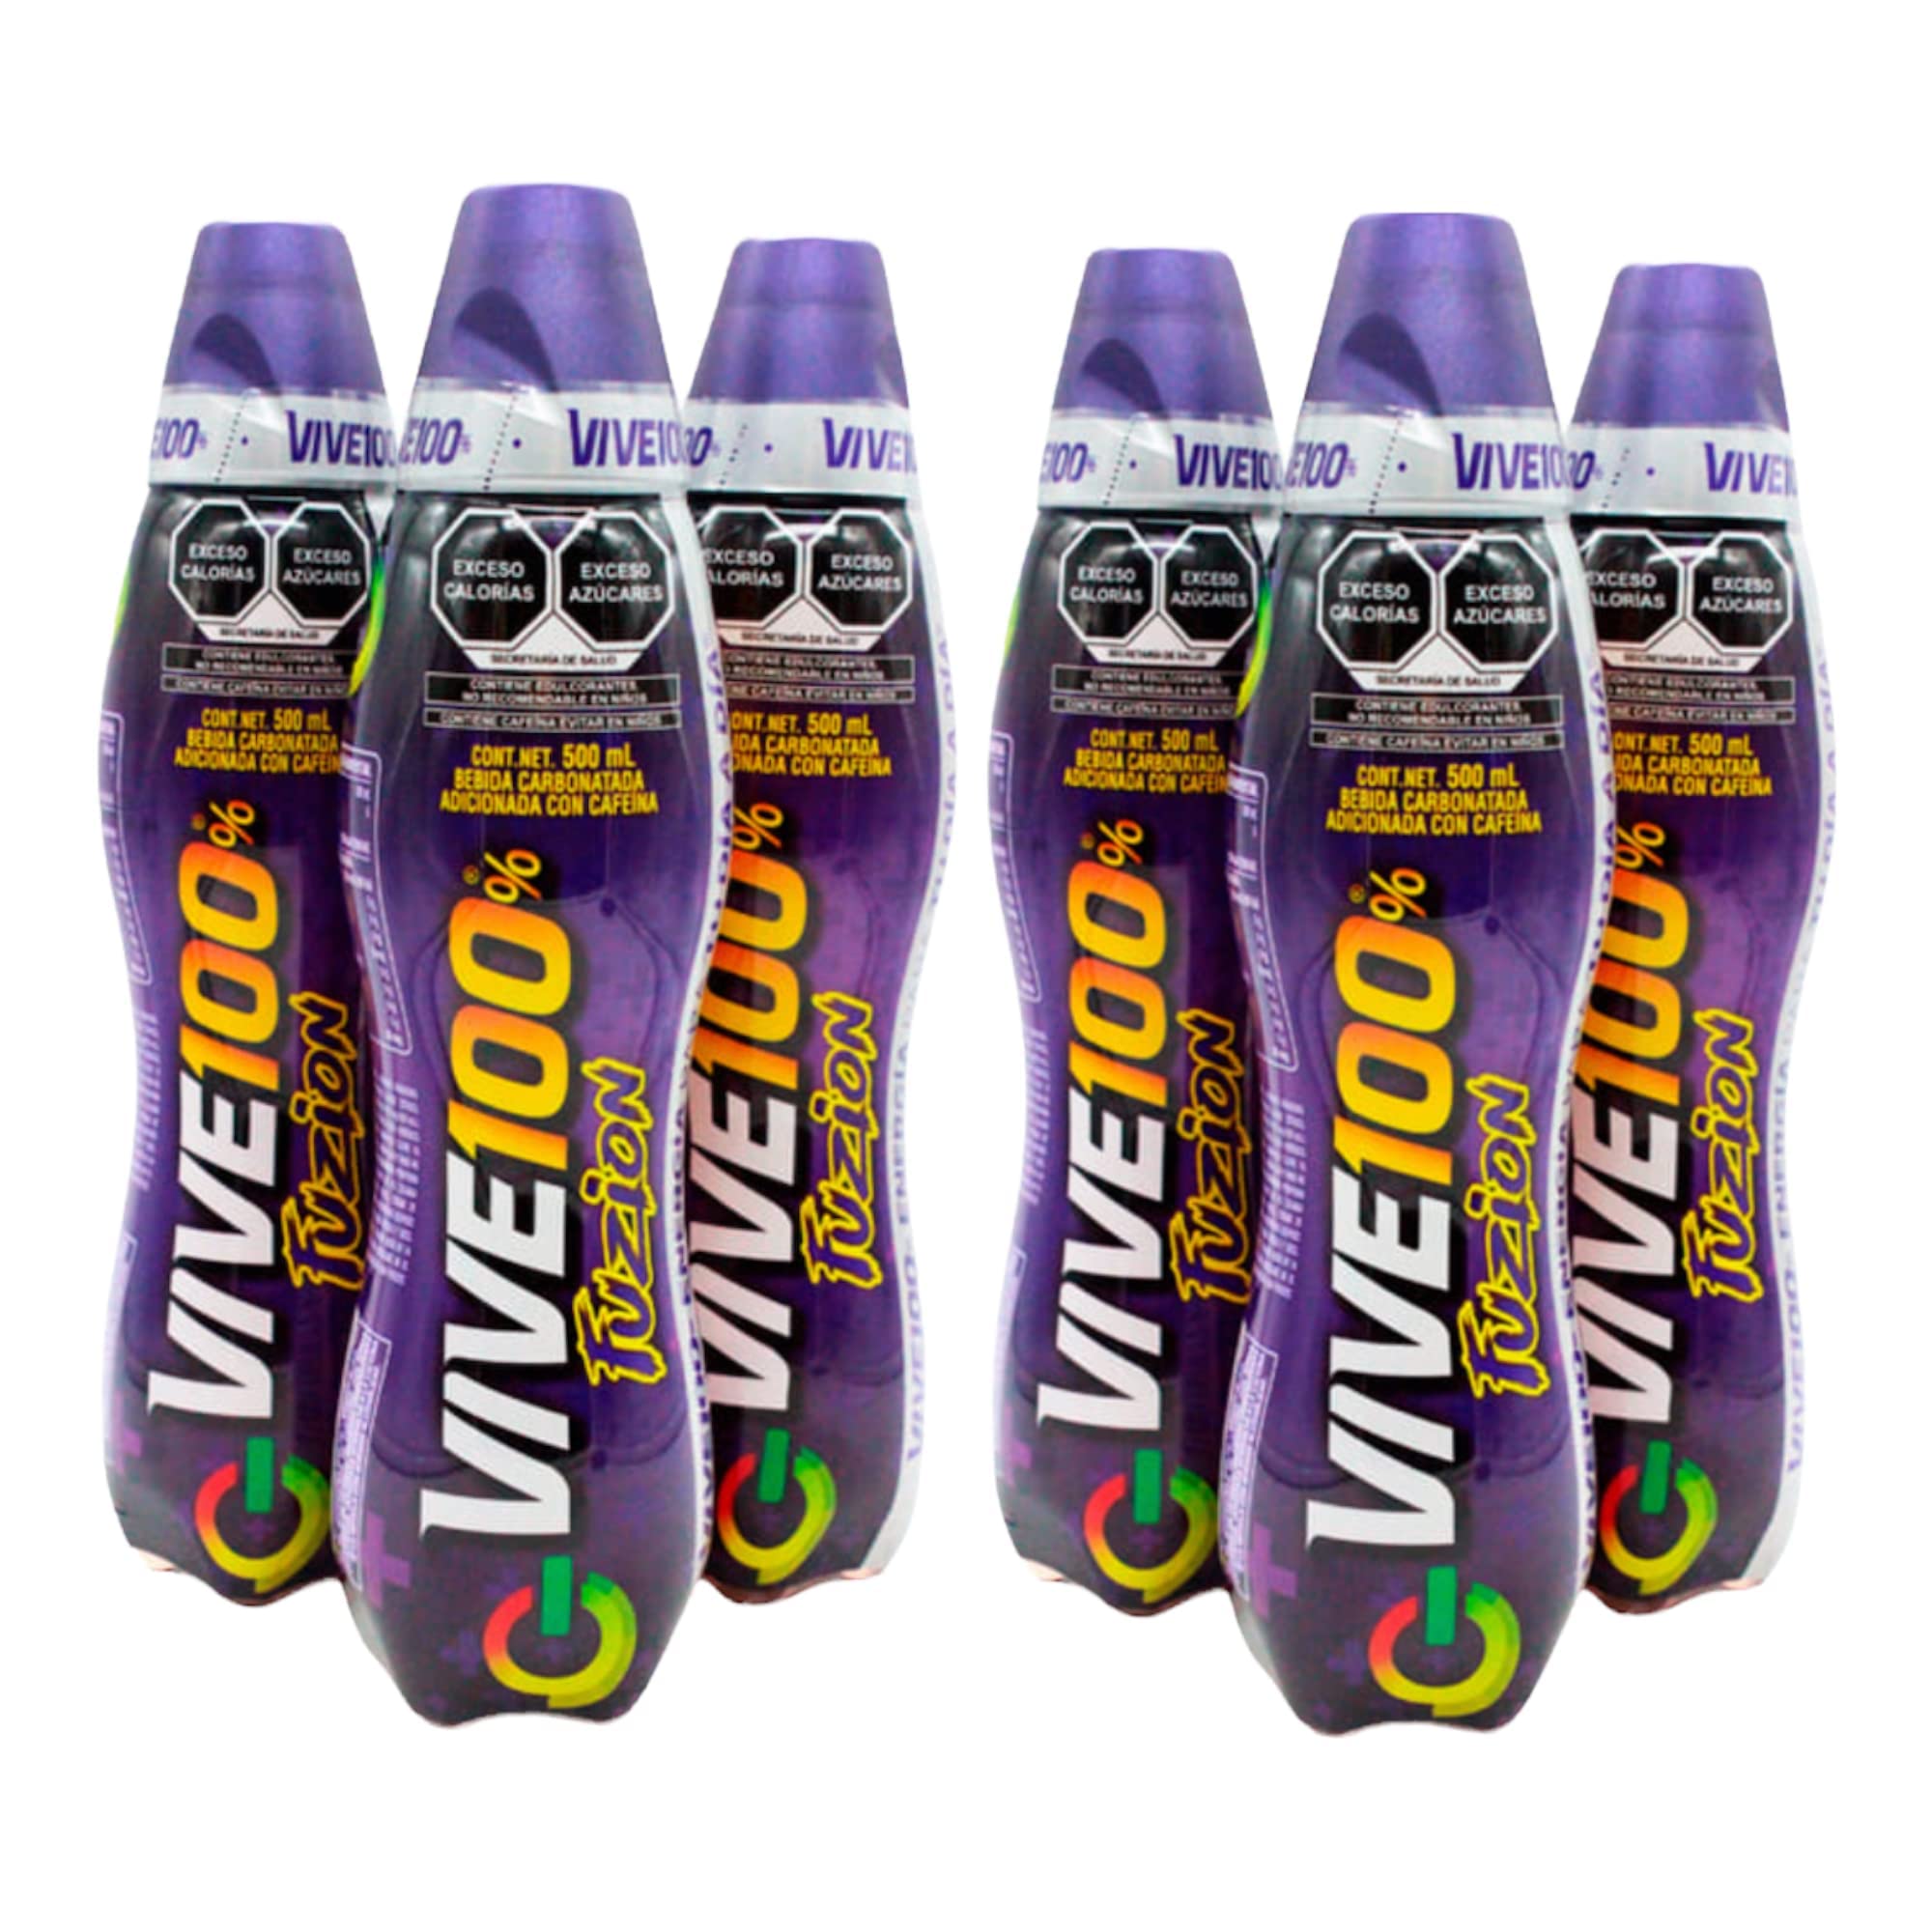 Amazon.com : Vive 100% - (6 Pack) 16.9 fl oz - Made In Mexico ...